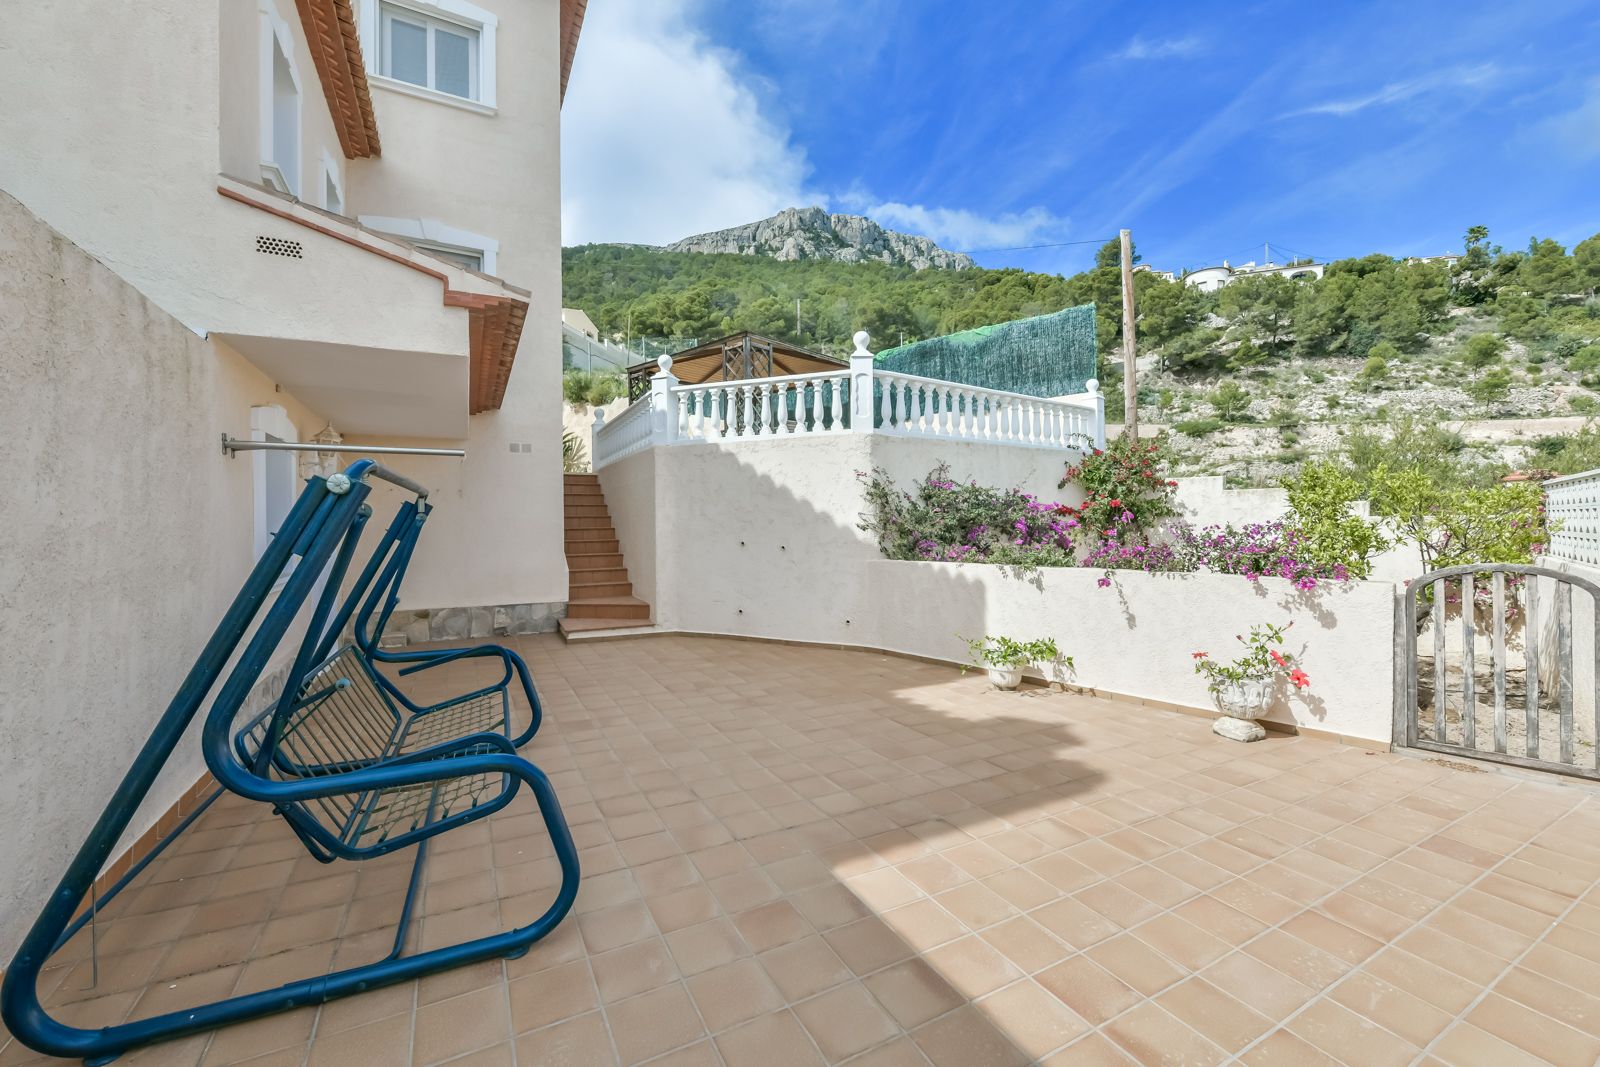 EXCELLENT VILLA IN CALPE WITH VIEWS